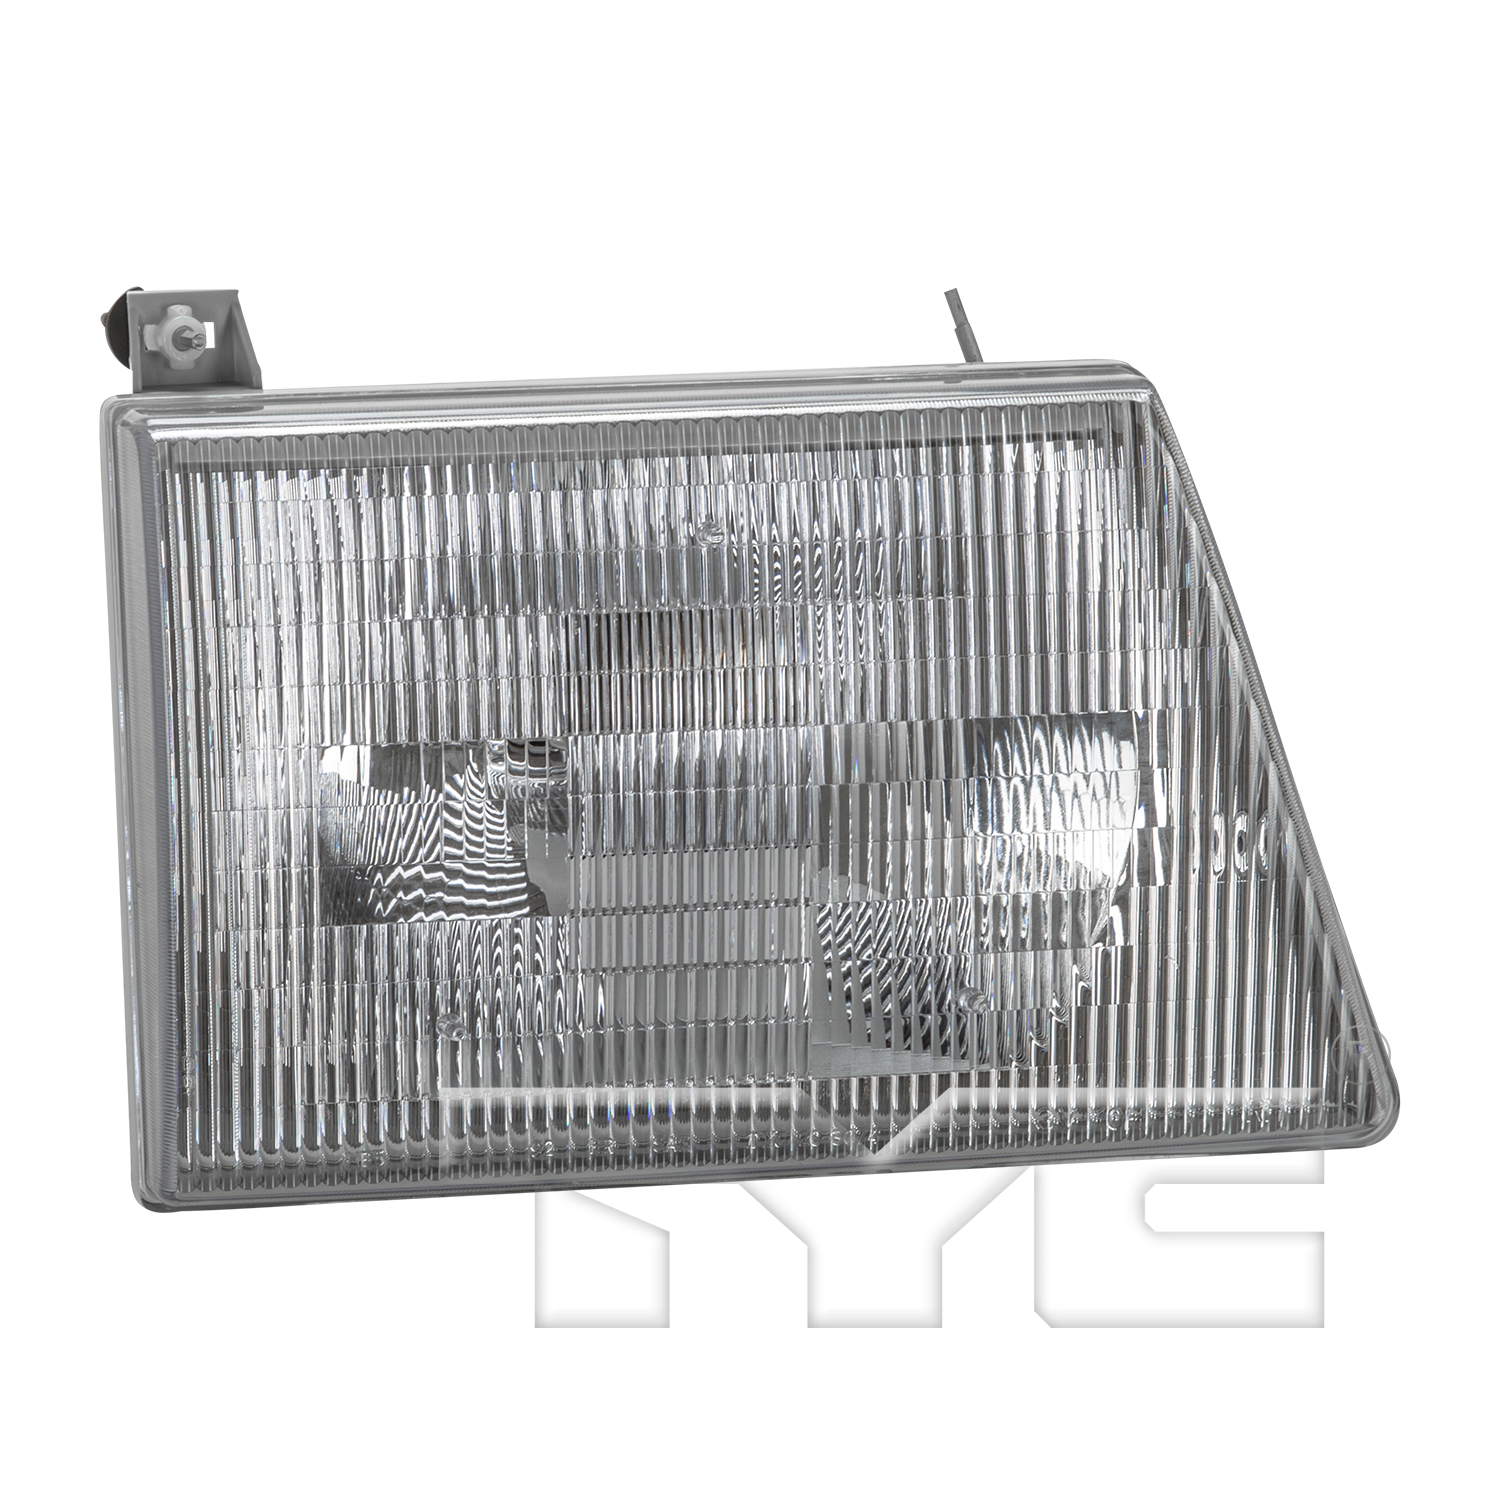 Aftermarket HEADLIGHTS for FORD - E-150 ECONOLINE CLUB WAGON, E-150 ECONOLINE CLUB WAGON,92-96,RT Headlamp assy composite